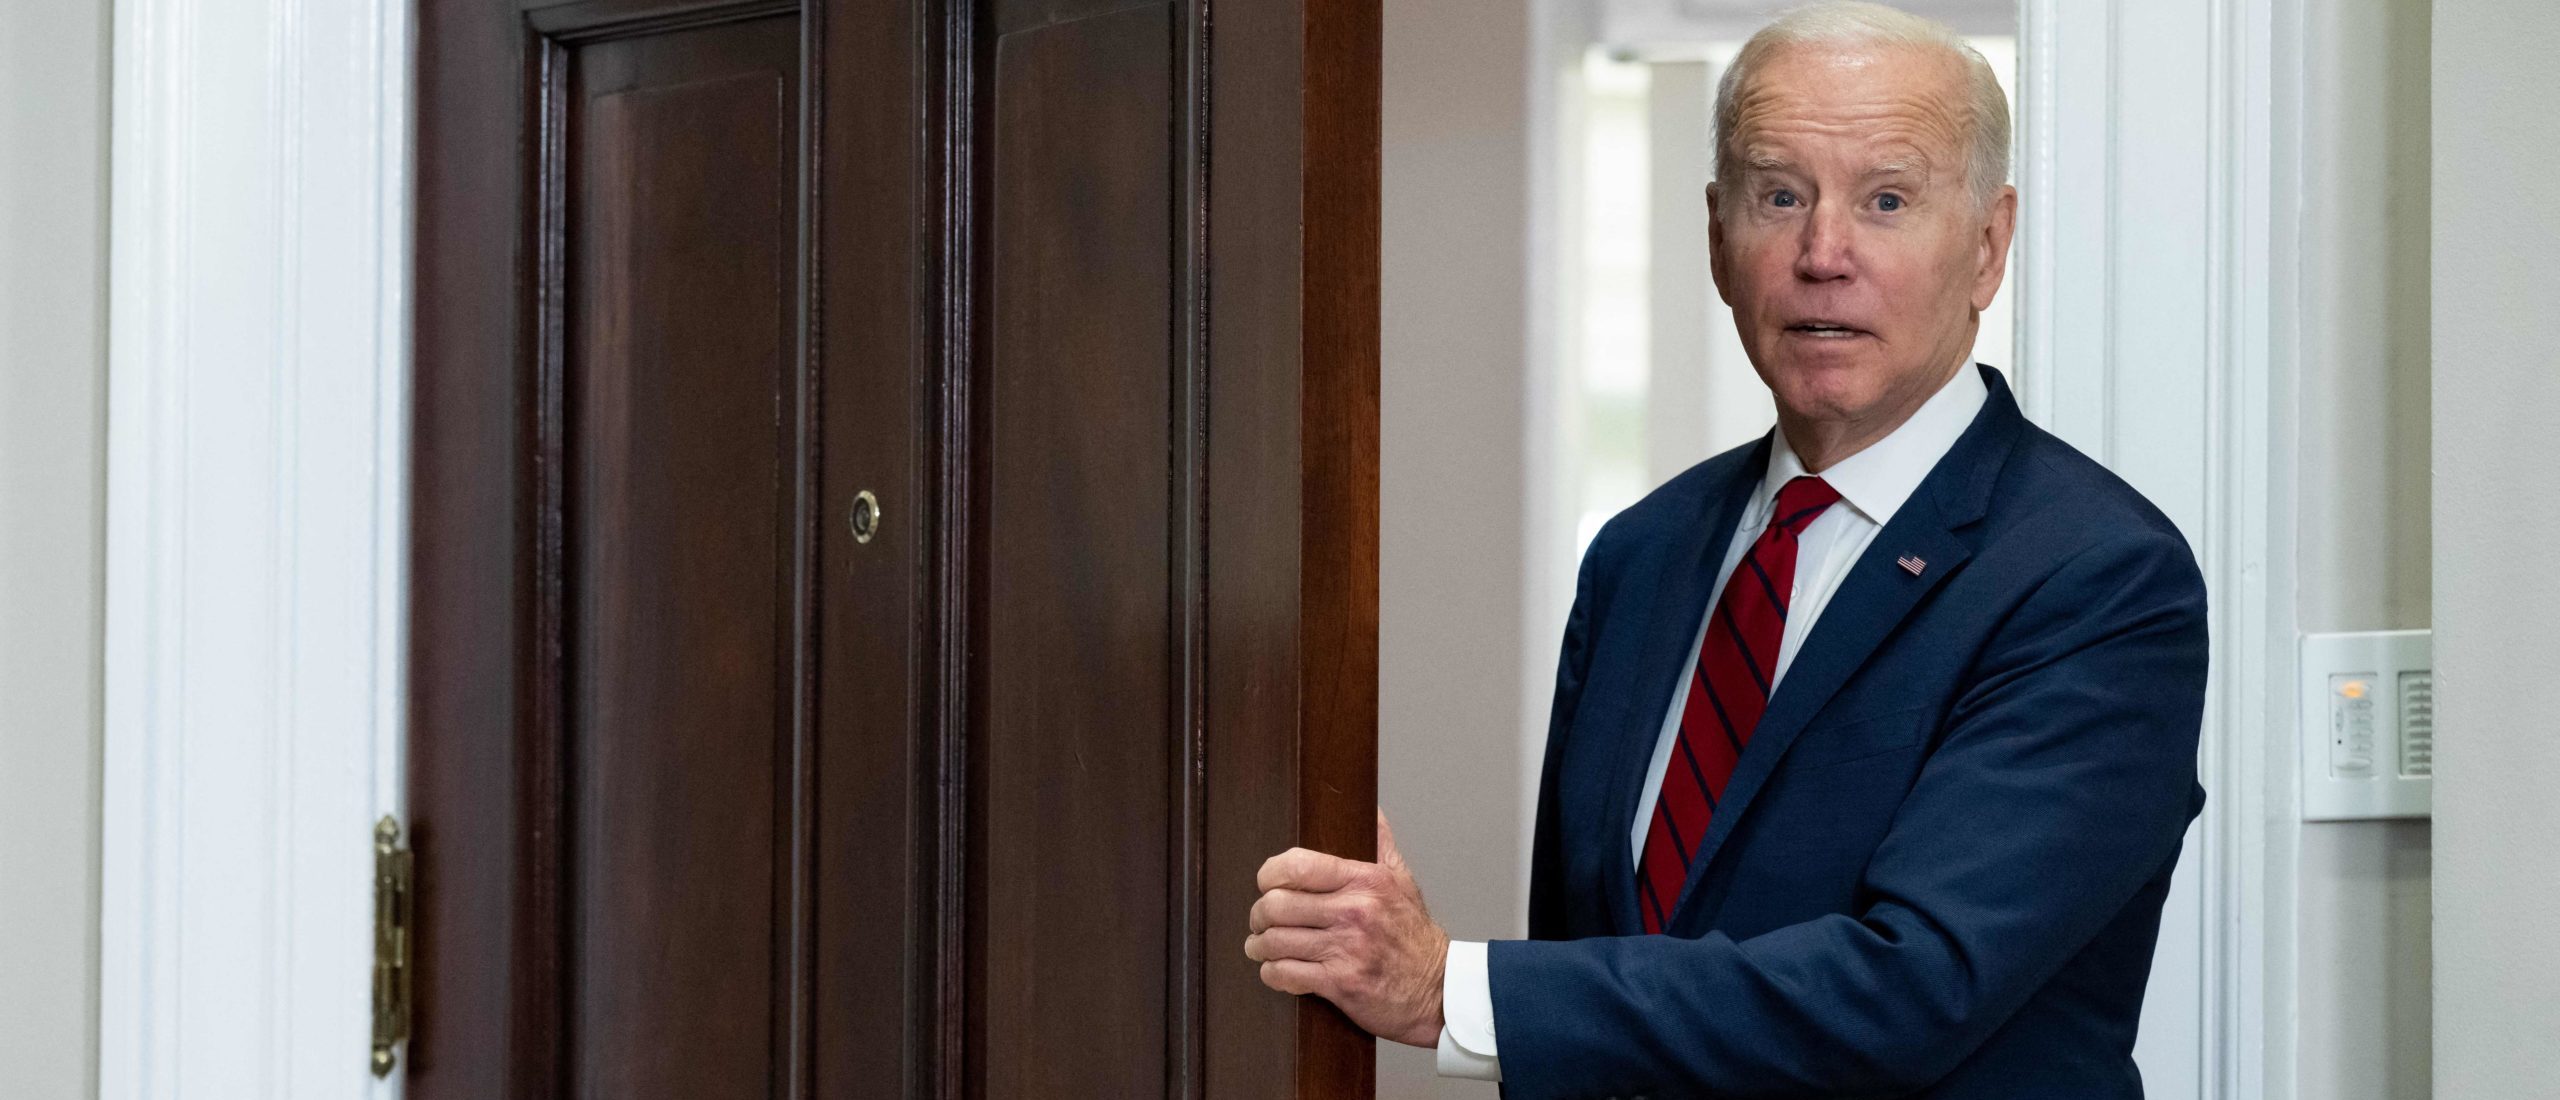 It’s Not Even An Election Year But The Clock Is Already Ticking For Joe Biden